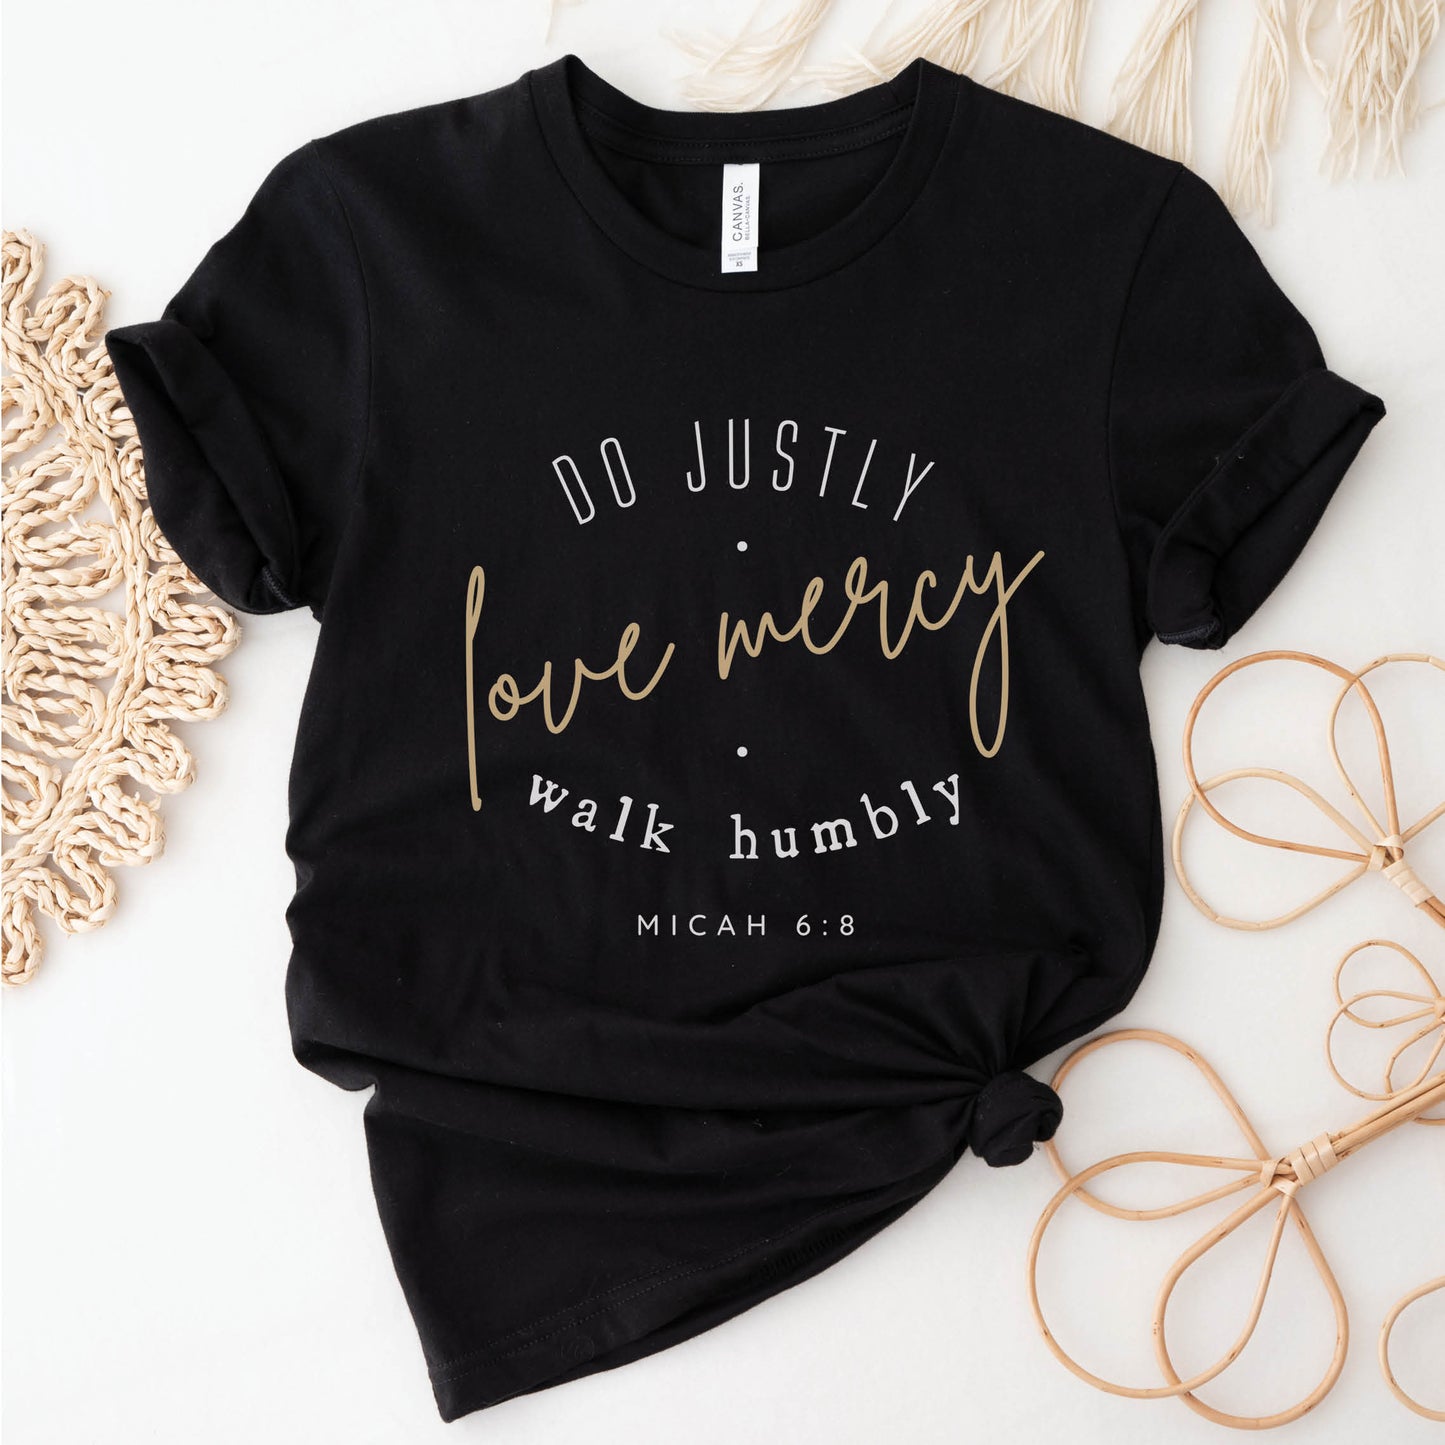 Do Justice Love Mercy Walk Humbly Christian Unisex T-Shirt